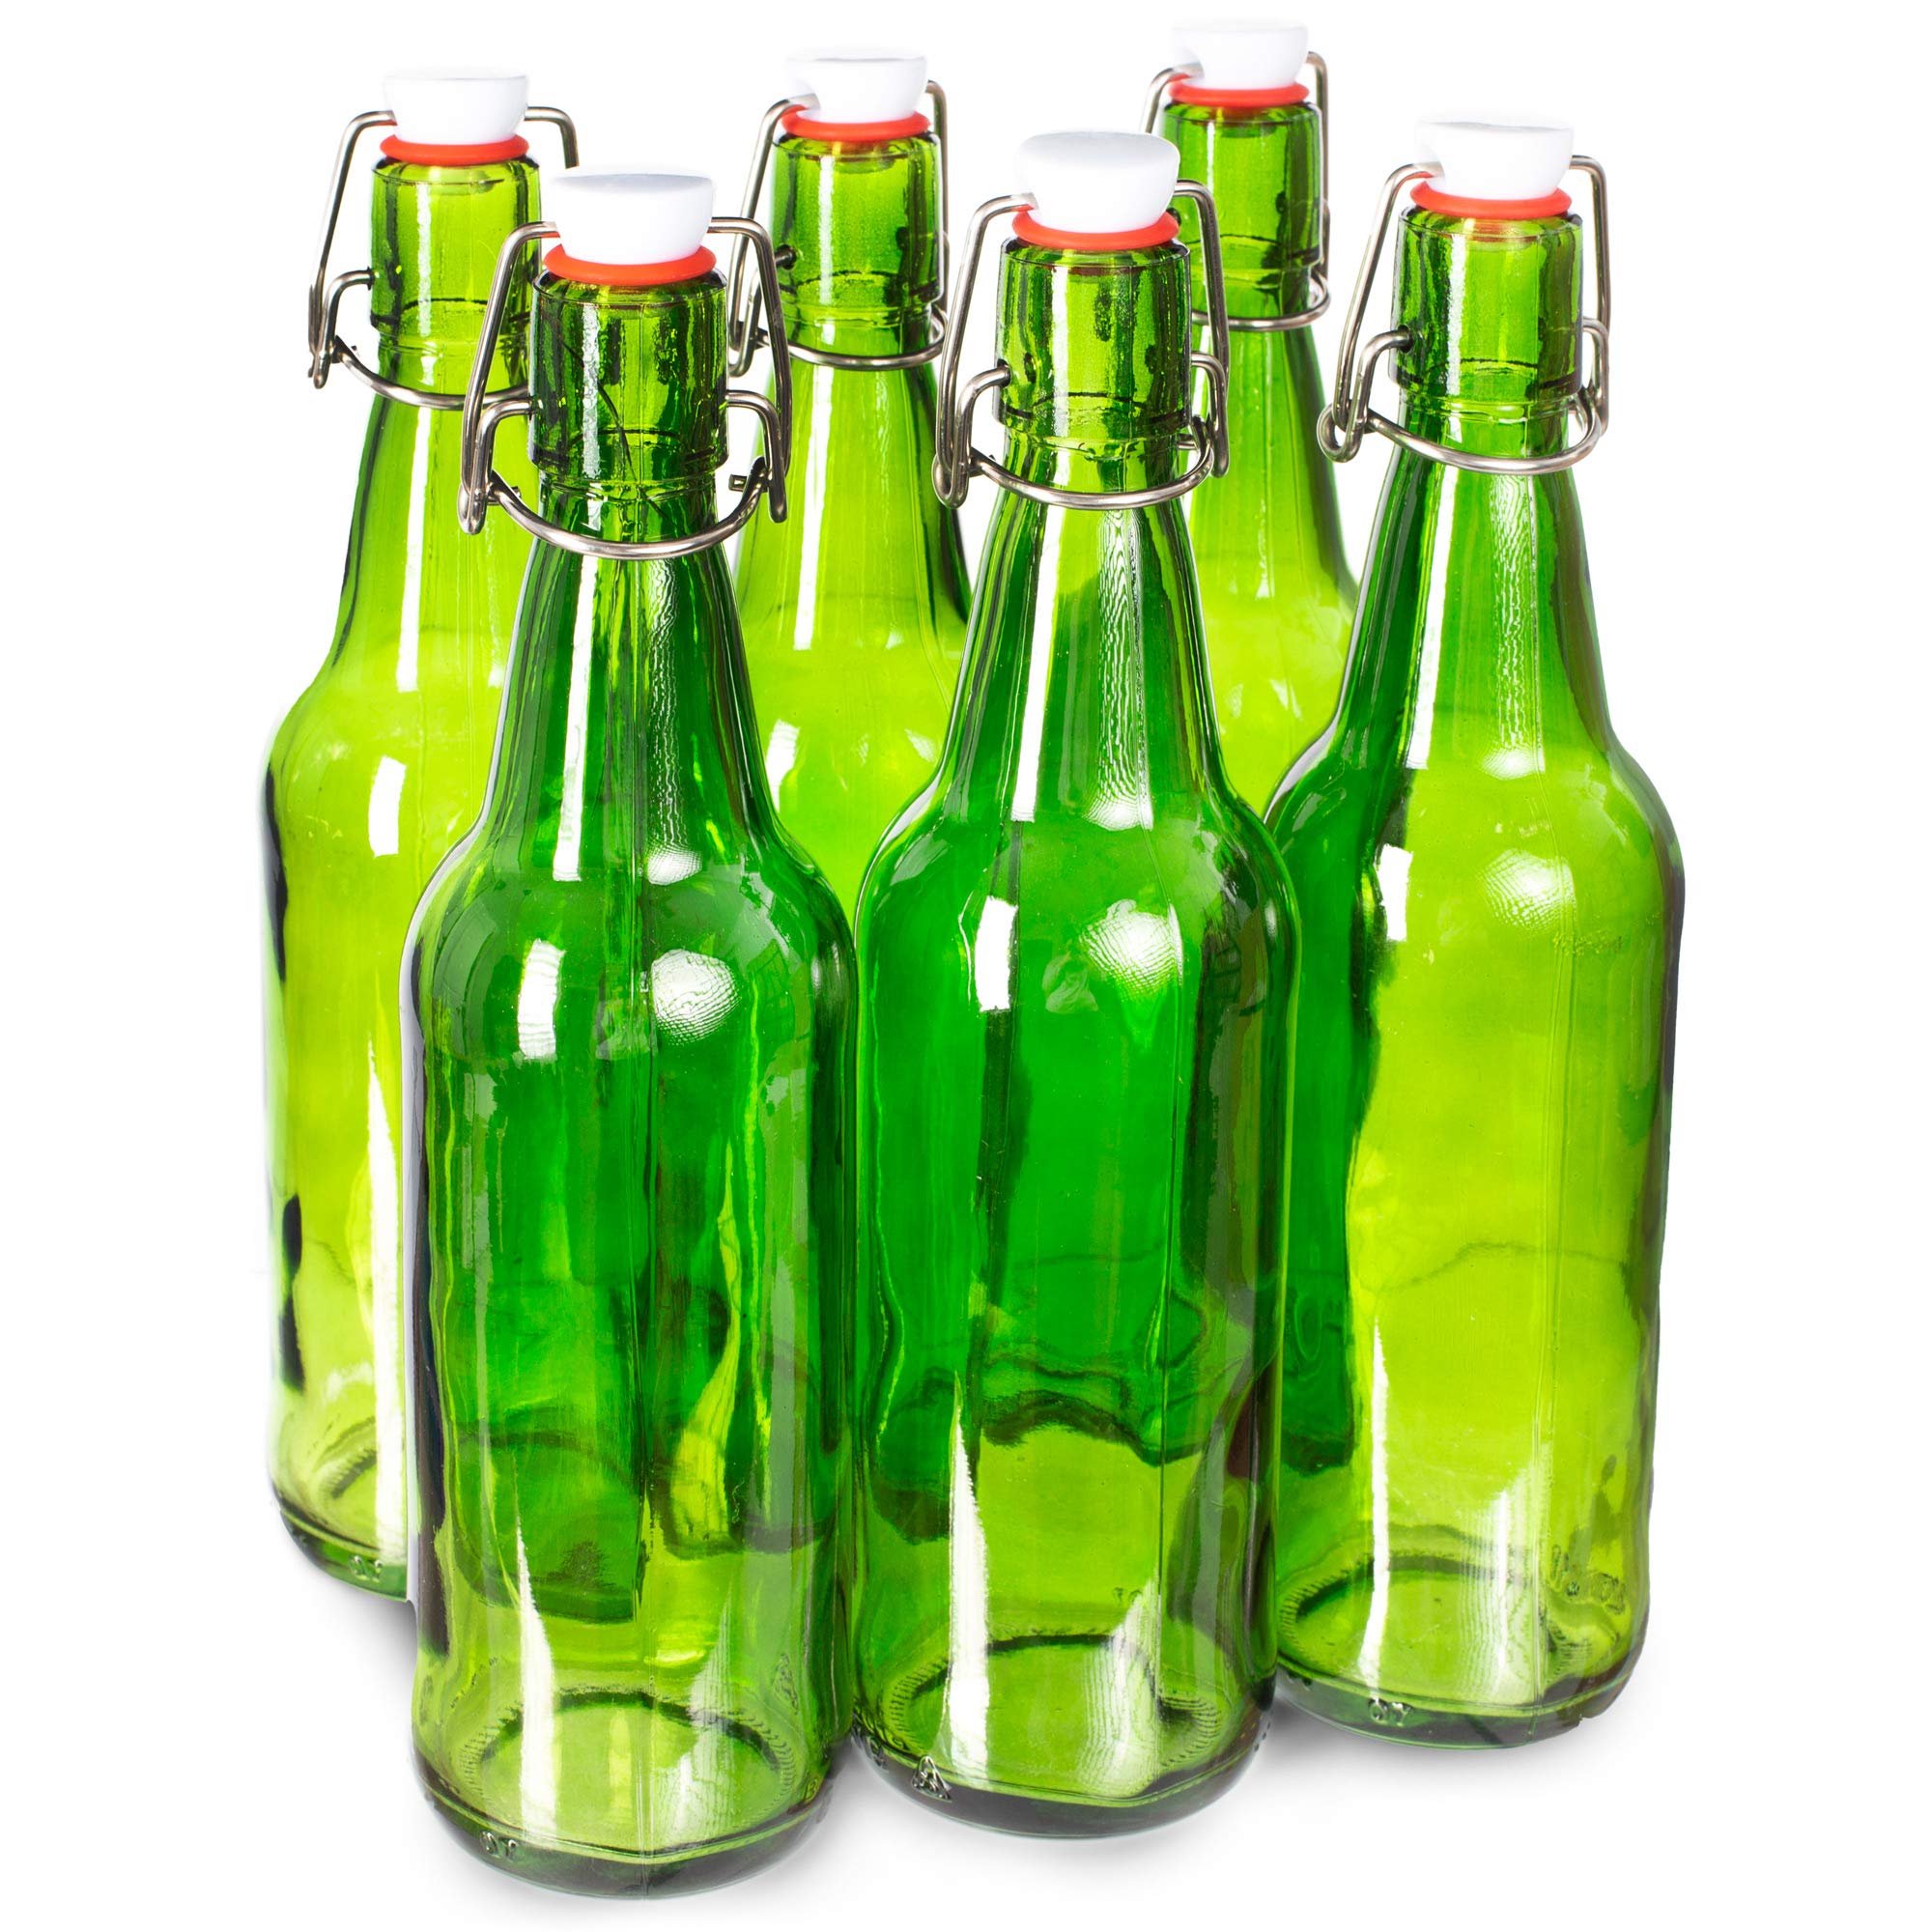 16 oz. Green Glass Grolsch Beer Bottles, Pint Size - Airtight Seal with Swing Top/Flip Top Stoppers - Supplies for Home Brewing & Fermenting of Alc...